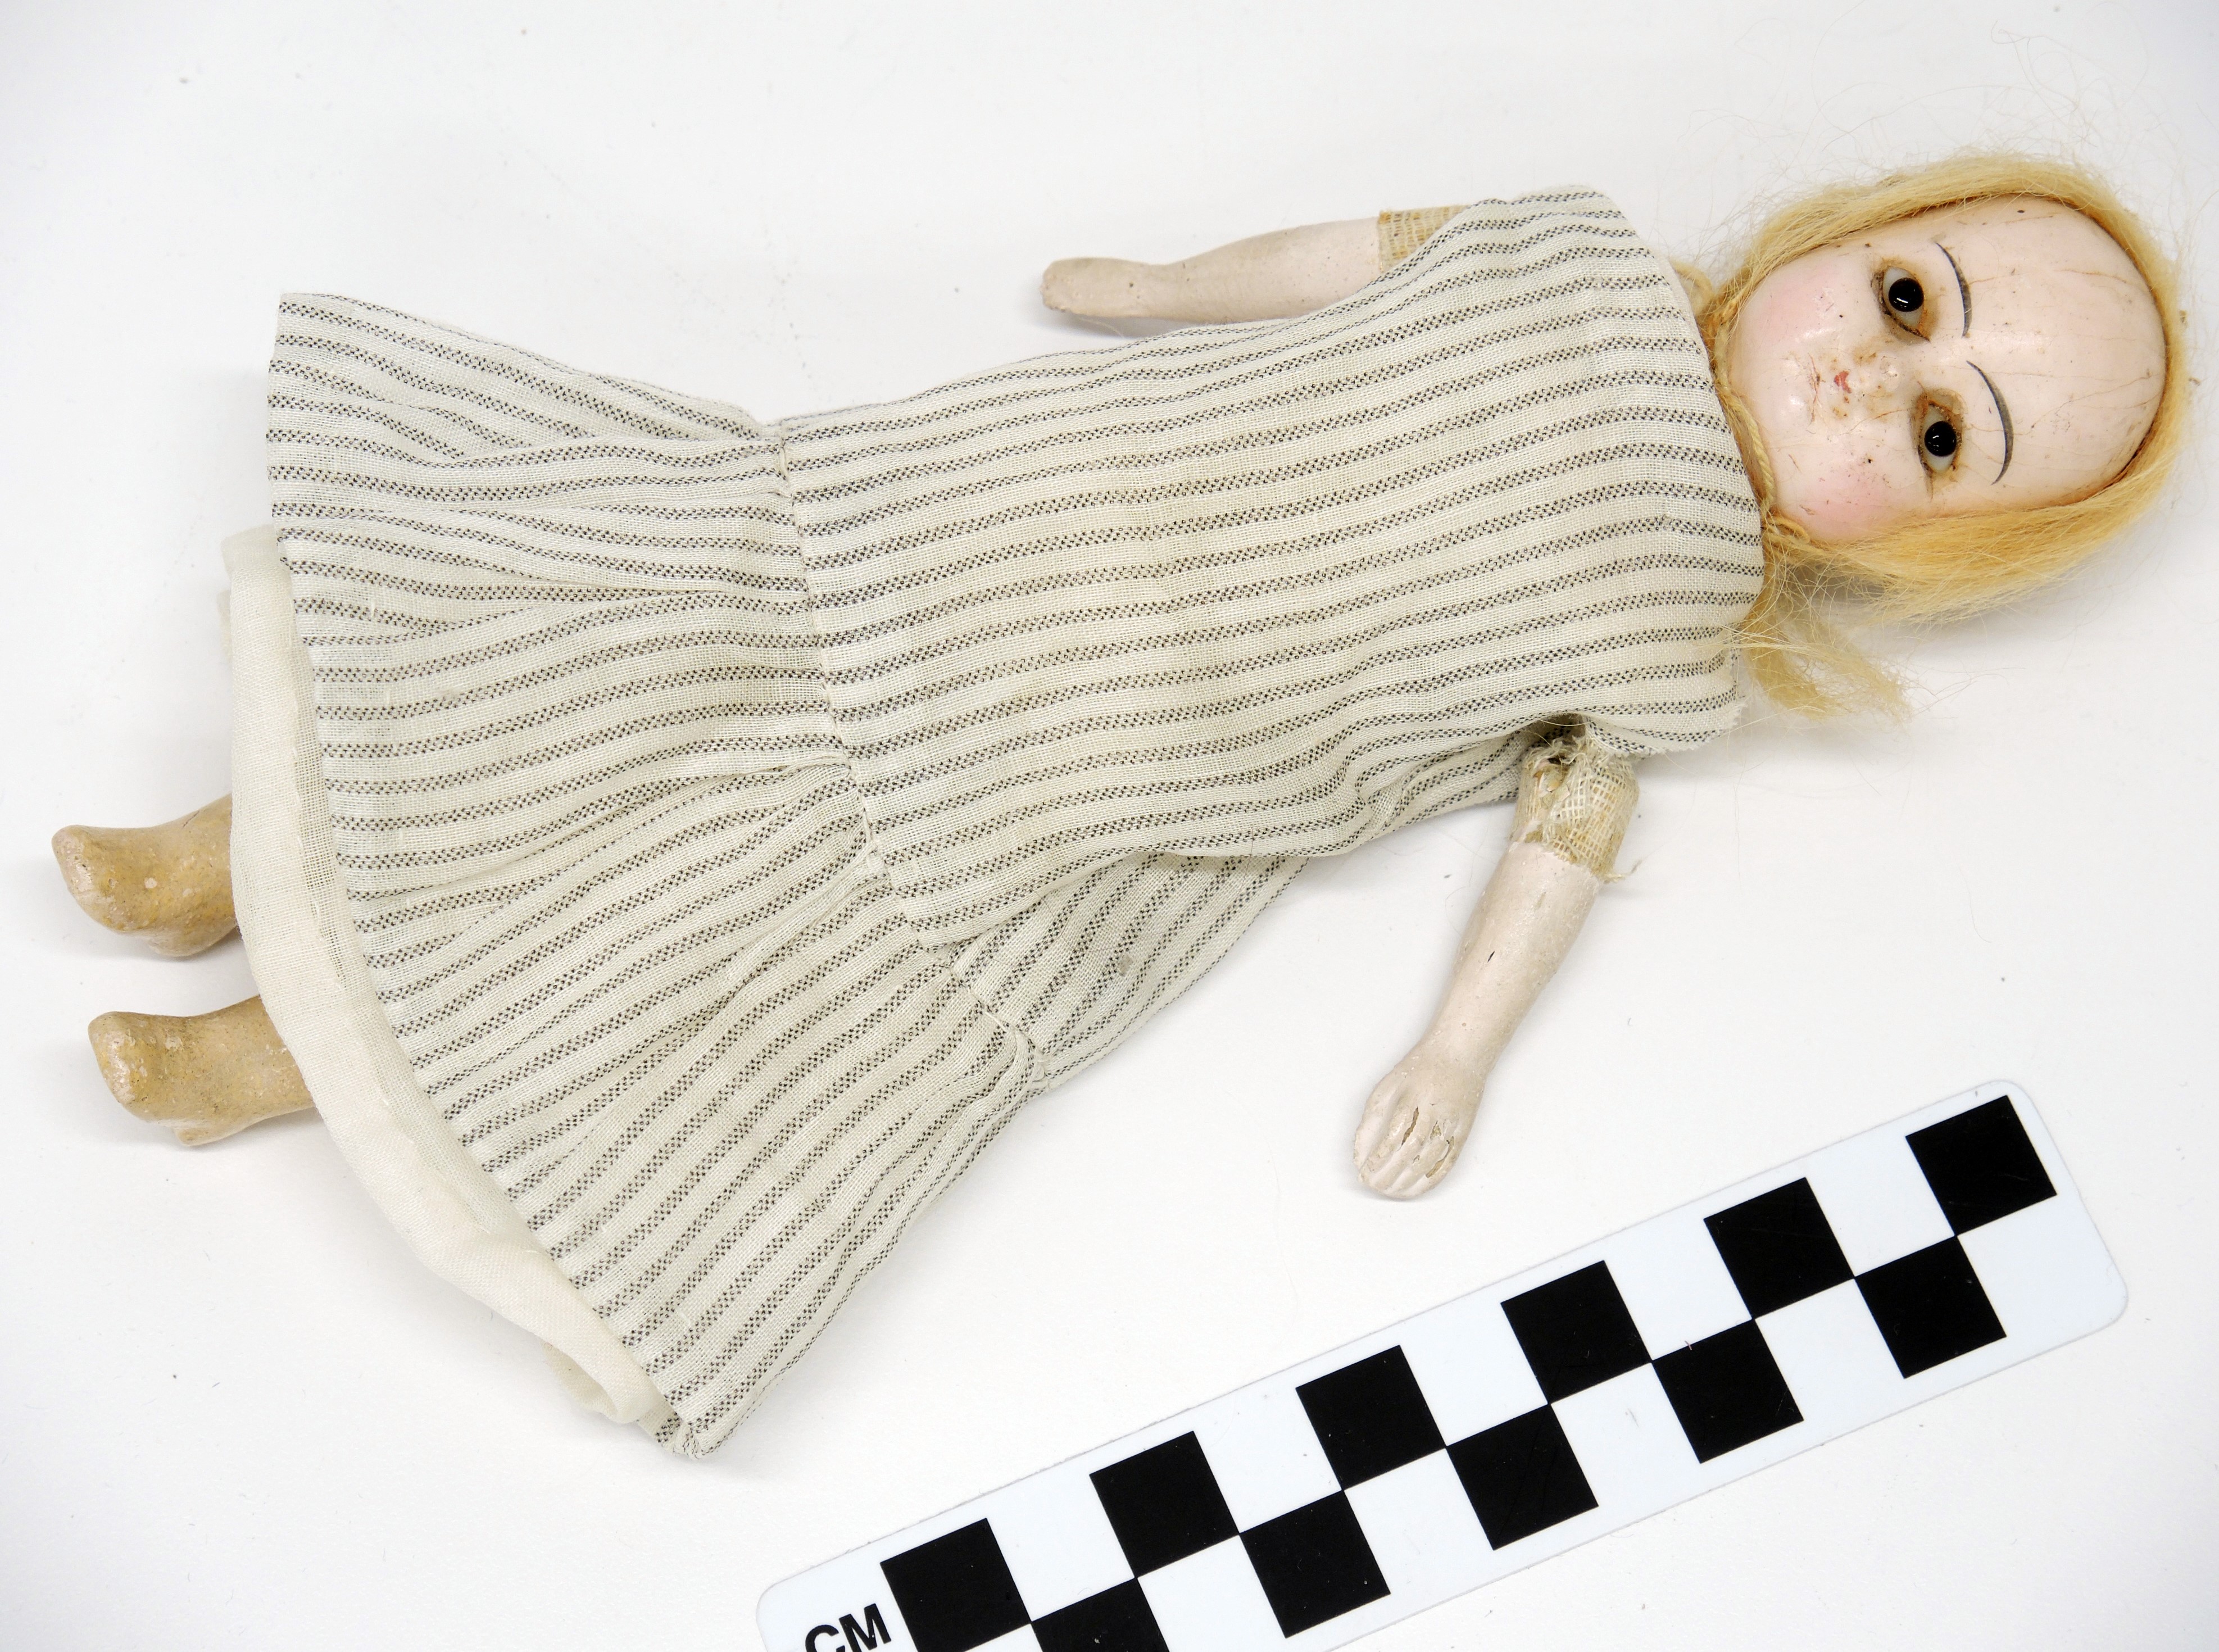 Photo of a doll from the museum collection, lying on a plain flat white background and next to a centimeter measurement strip. The doll approximately 15-18 cm long, and has thin straight shoulder-length blonde hair. Its facial markings are simple, with painted eyebrows and no eyelashes. The doll is dressed in a thinly striped gray and white dress, simply styled and made of cotton.